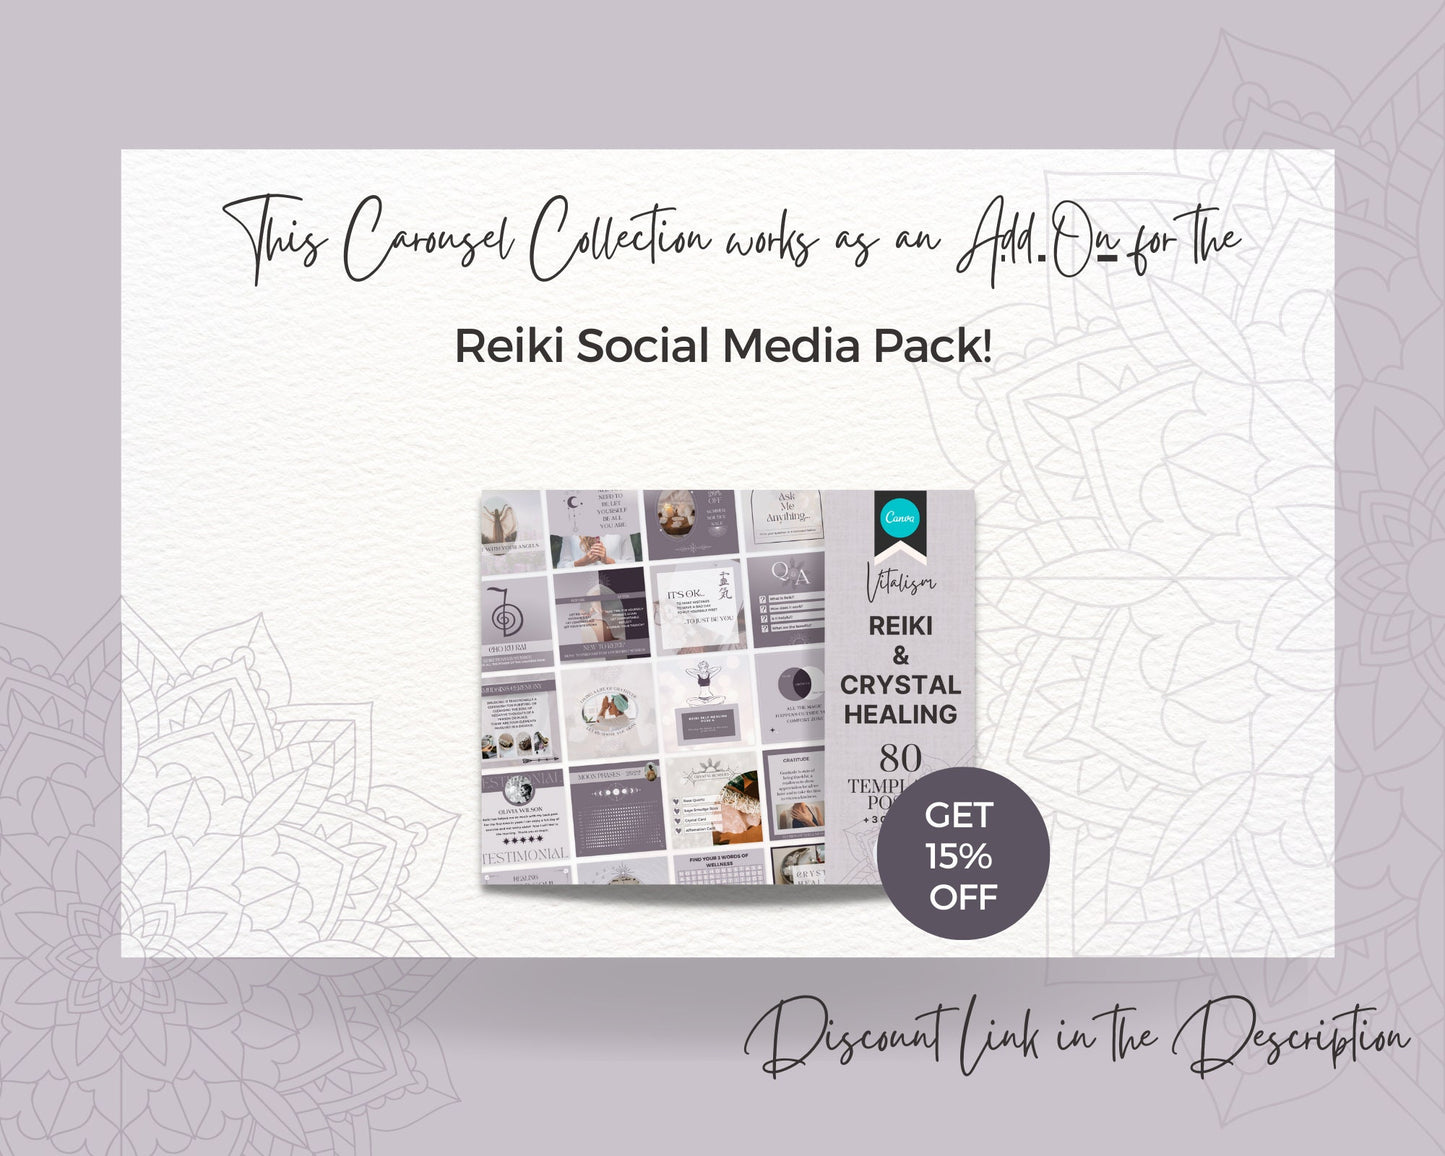 Chakra Crystals Instagram Template Carousel Collection.  7 Chakras Energy Healing Instagram Carousel, Reiki Chakra crystal healing posts